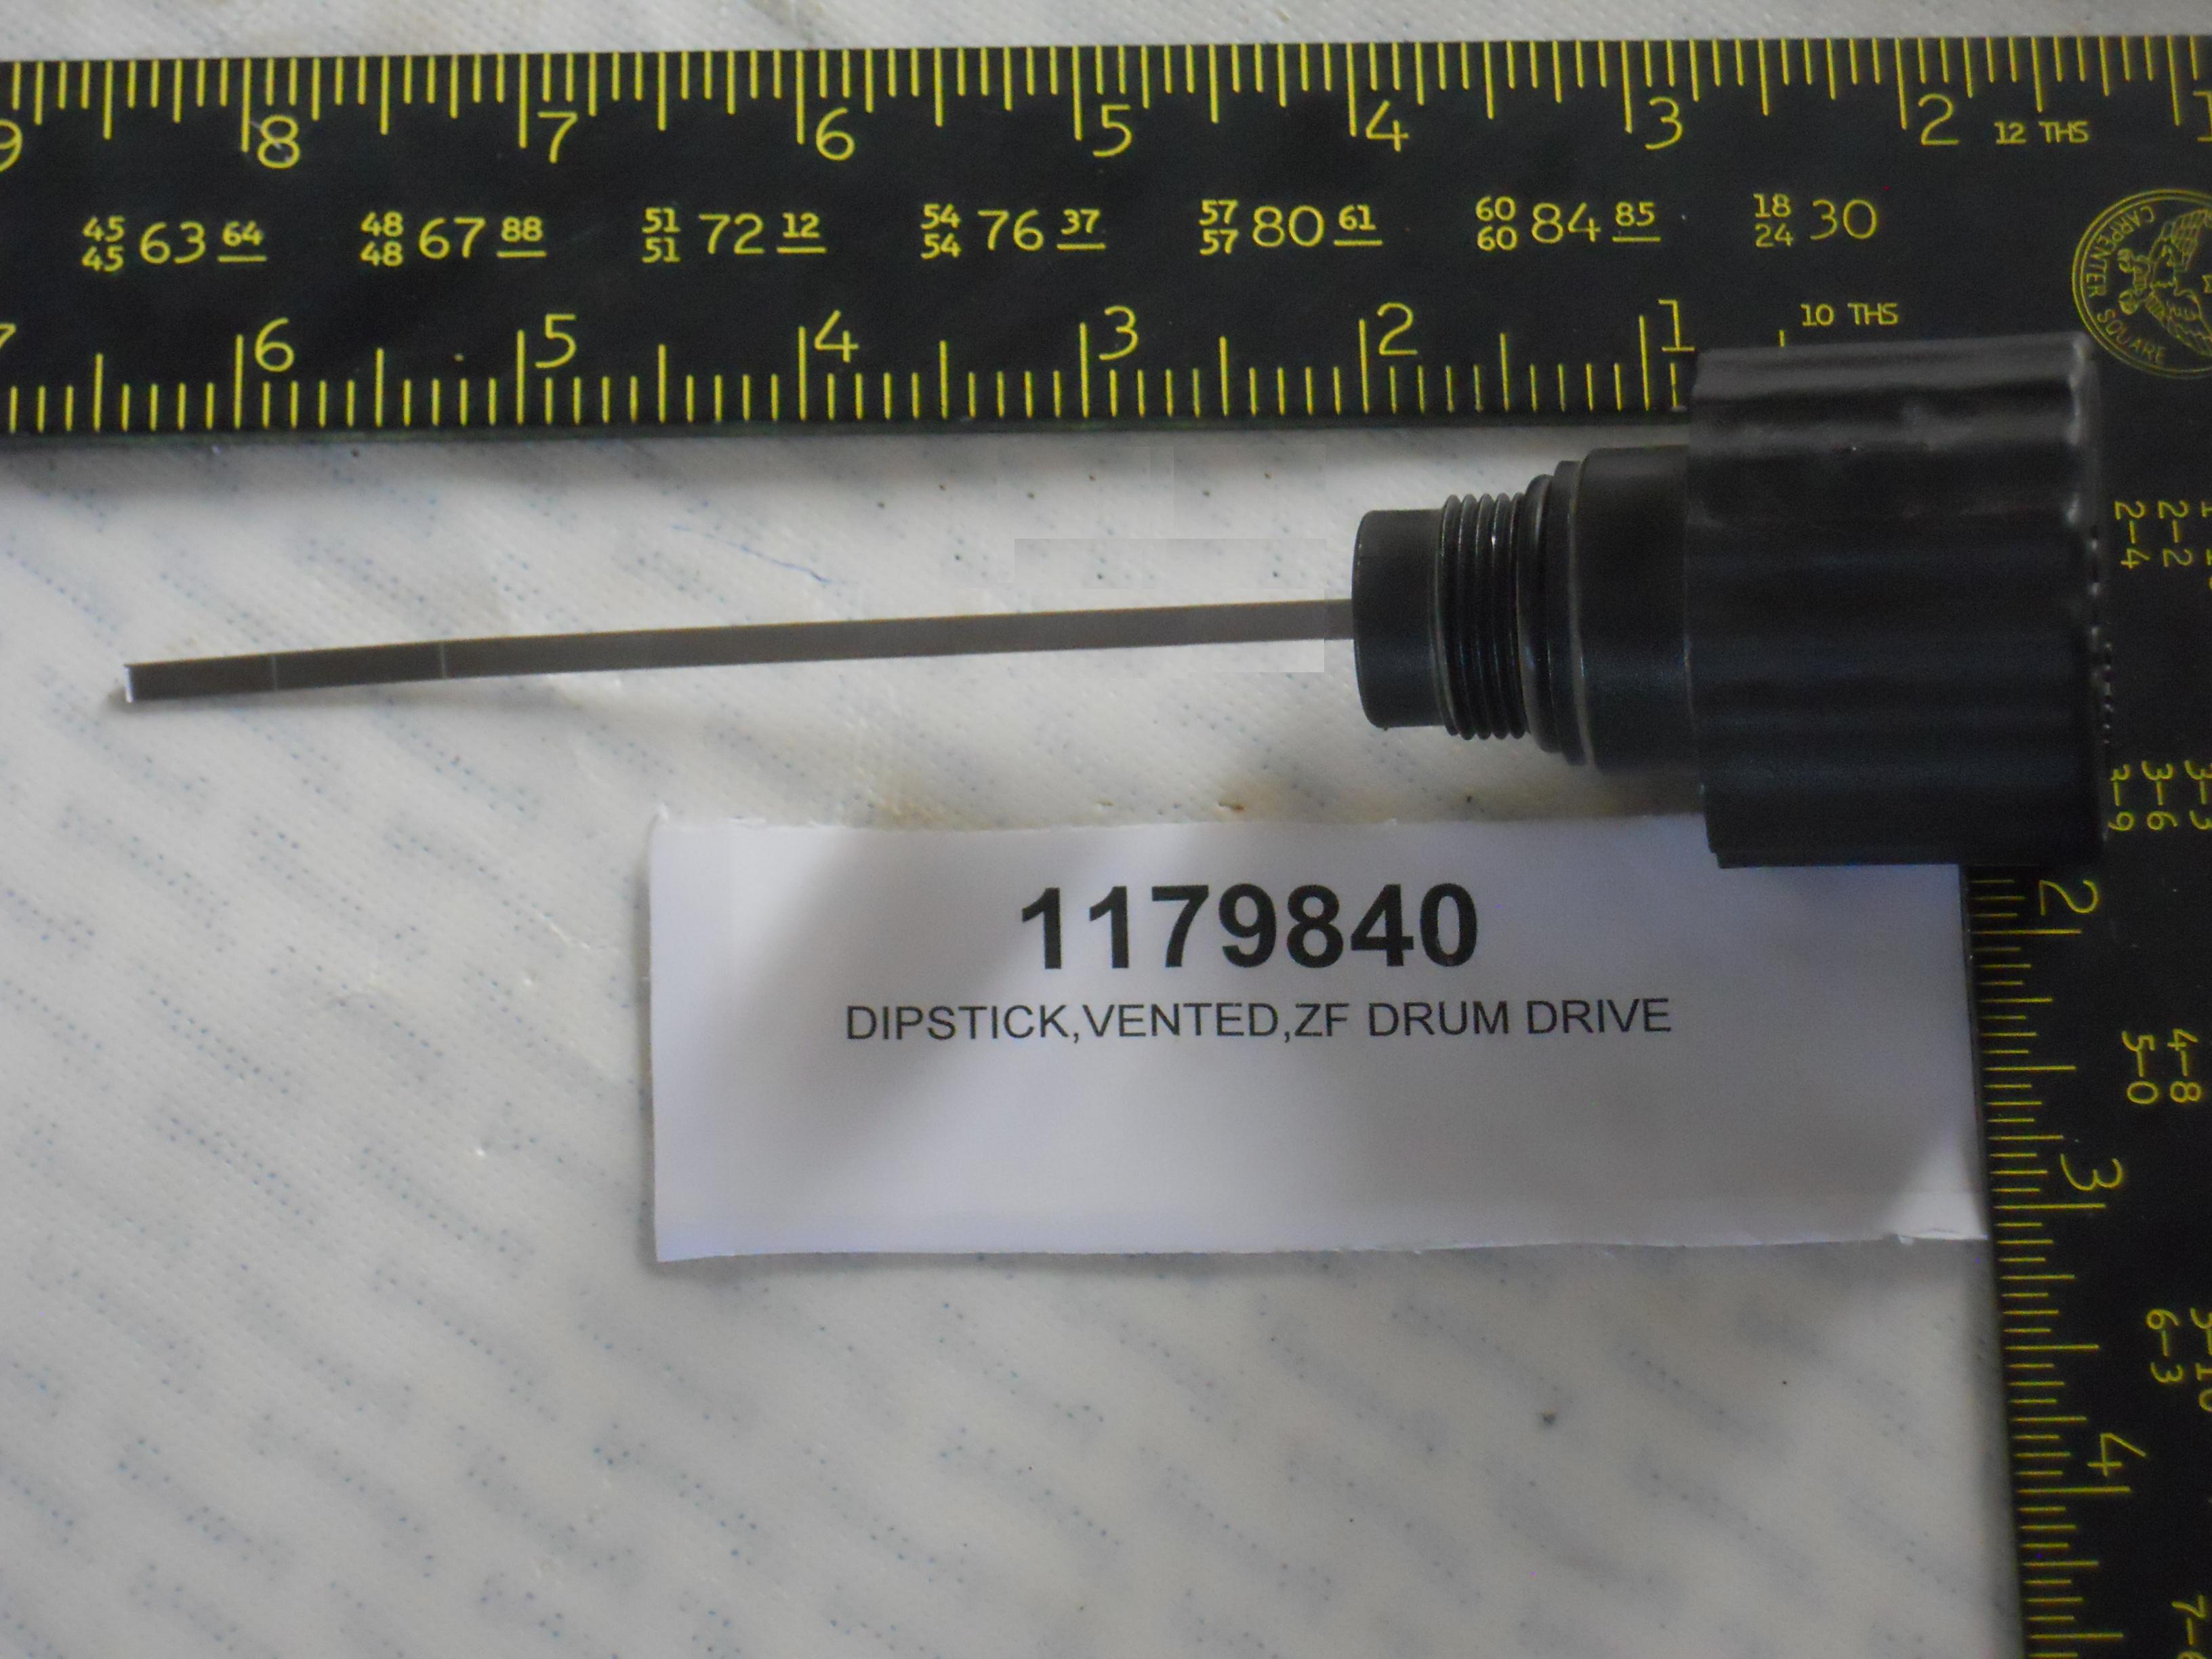 DIPSTICK,VENTED,ZF DRUM DRIVE